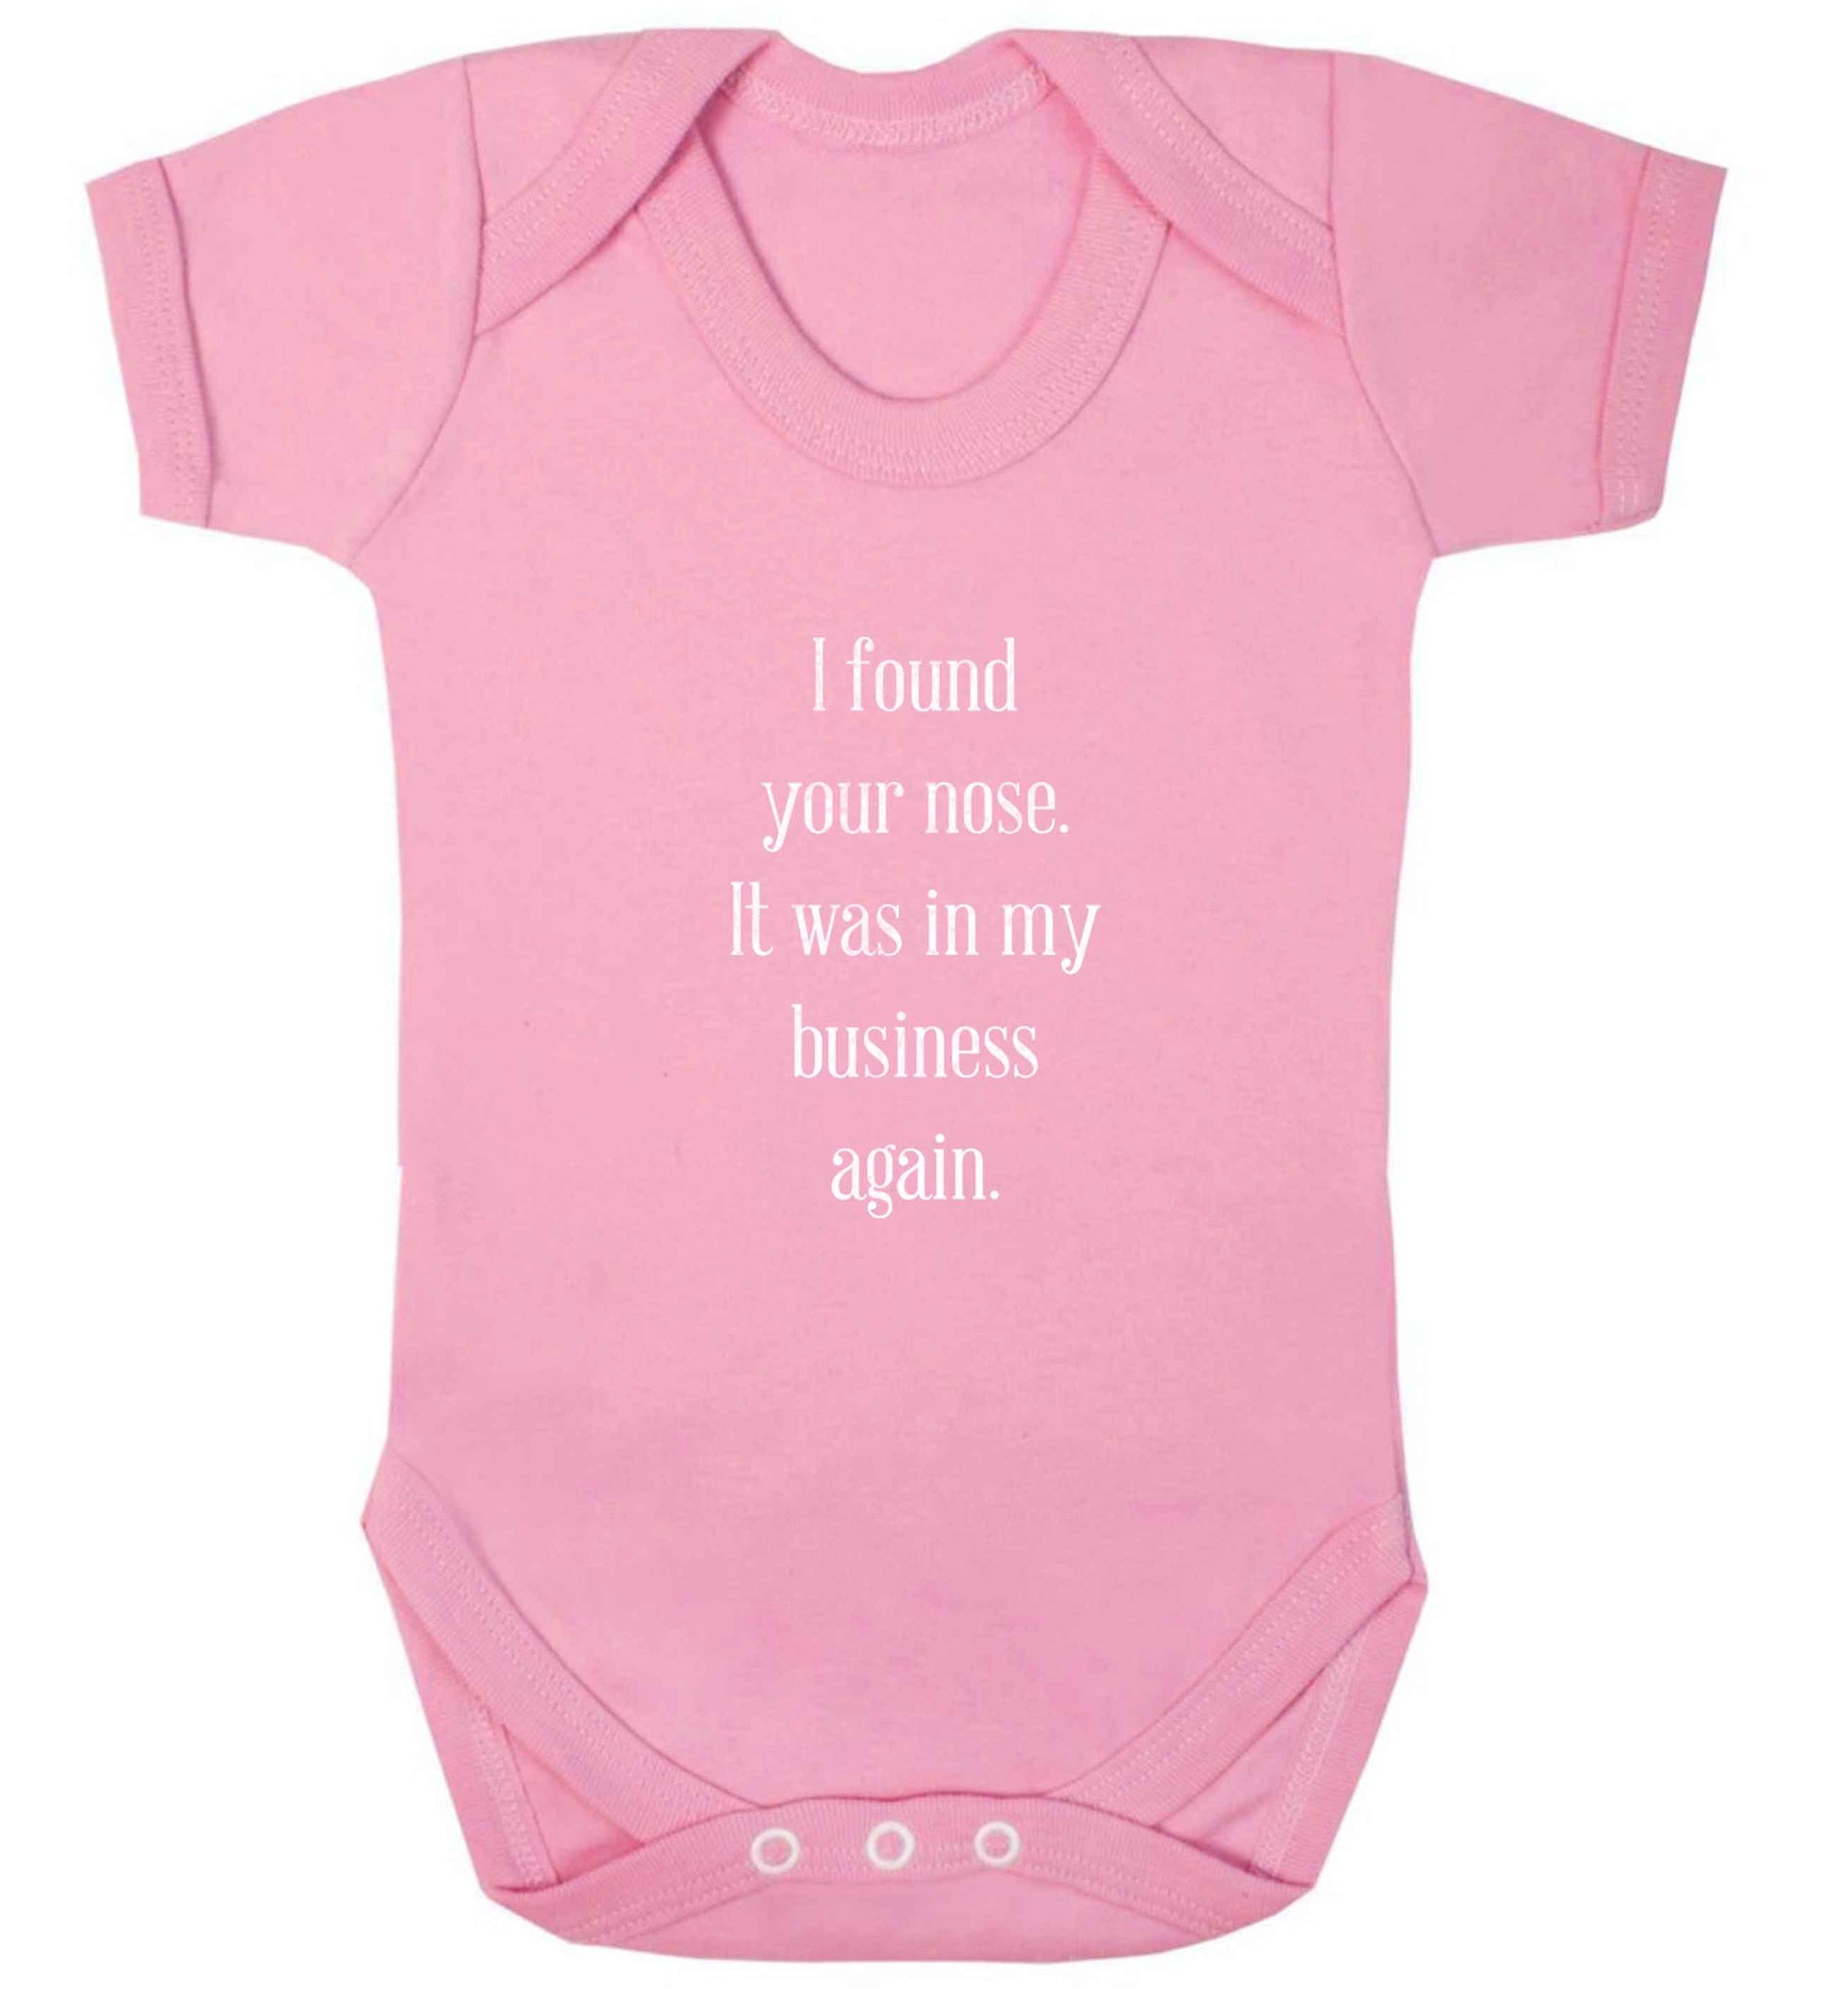 I found your nose it was in my business again baby vest pale pink 18-24 months